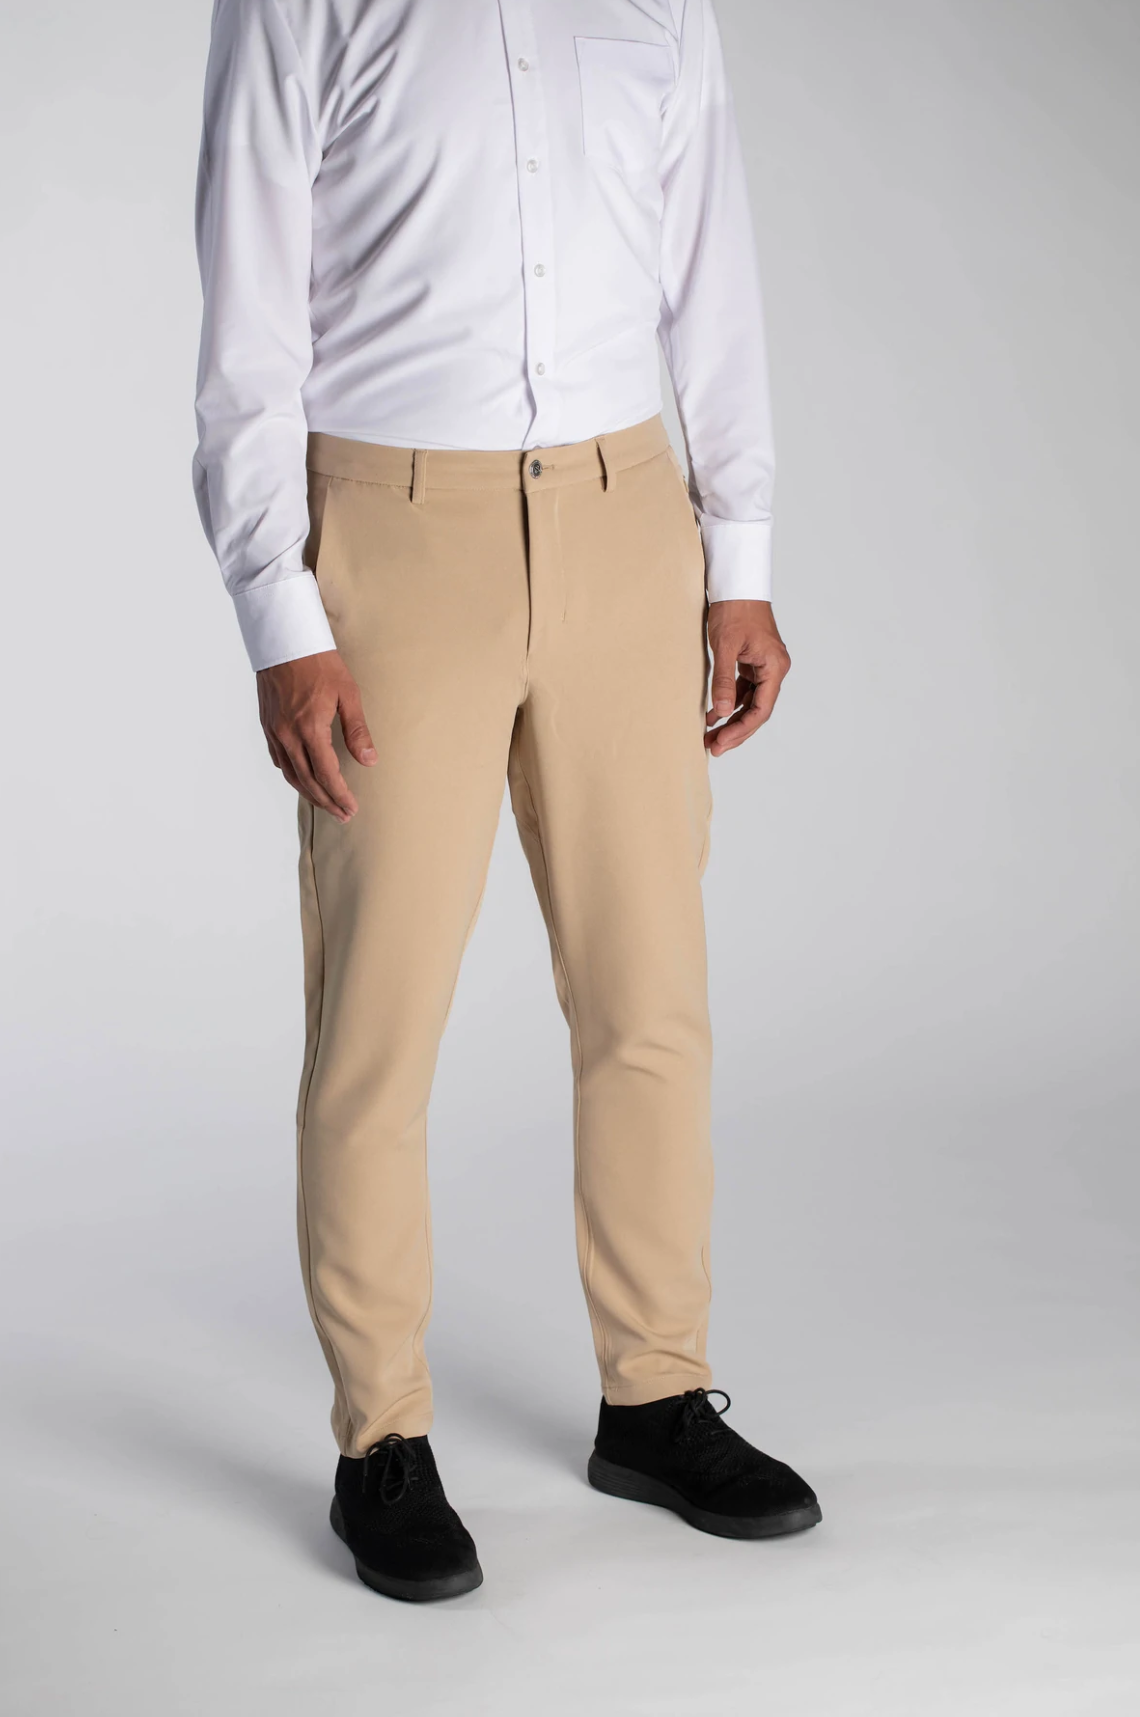 &Collar Performance Pant - Athletic Fit